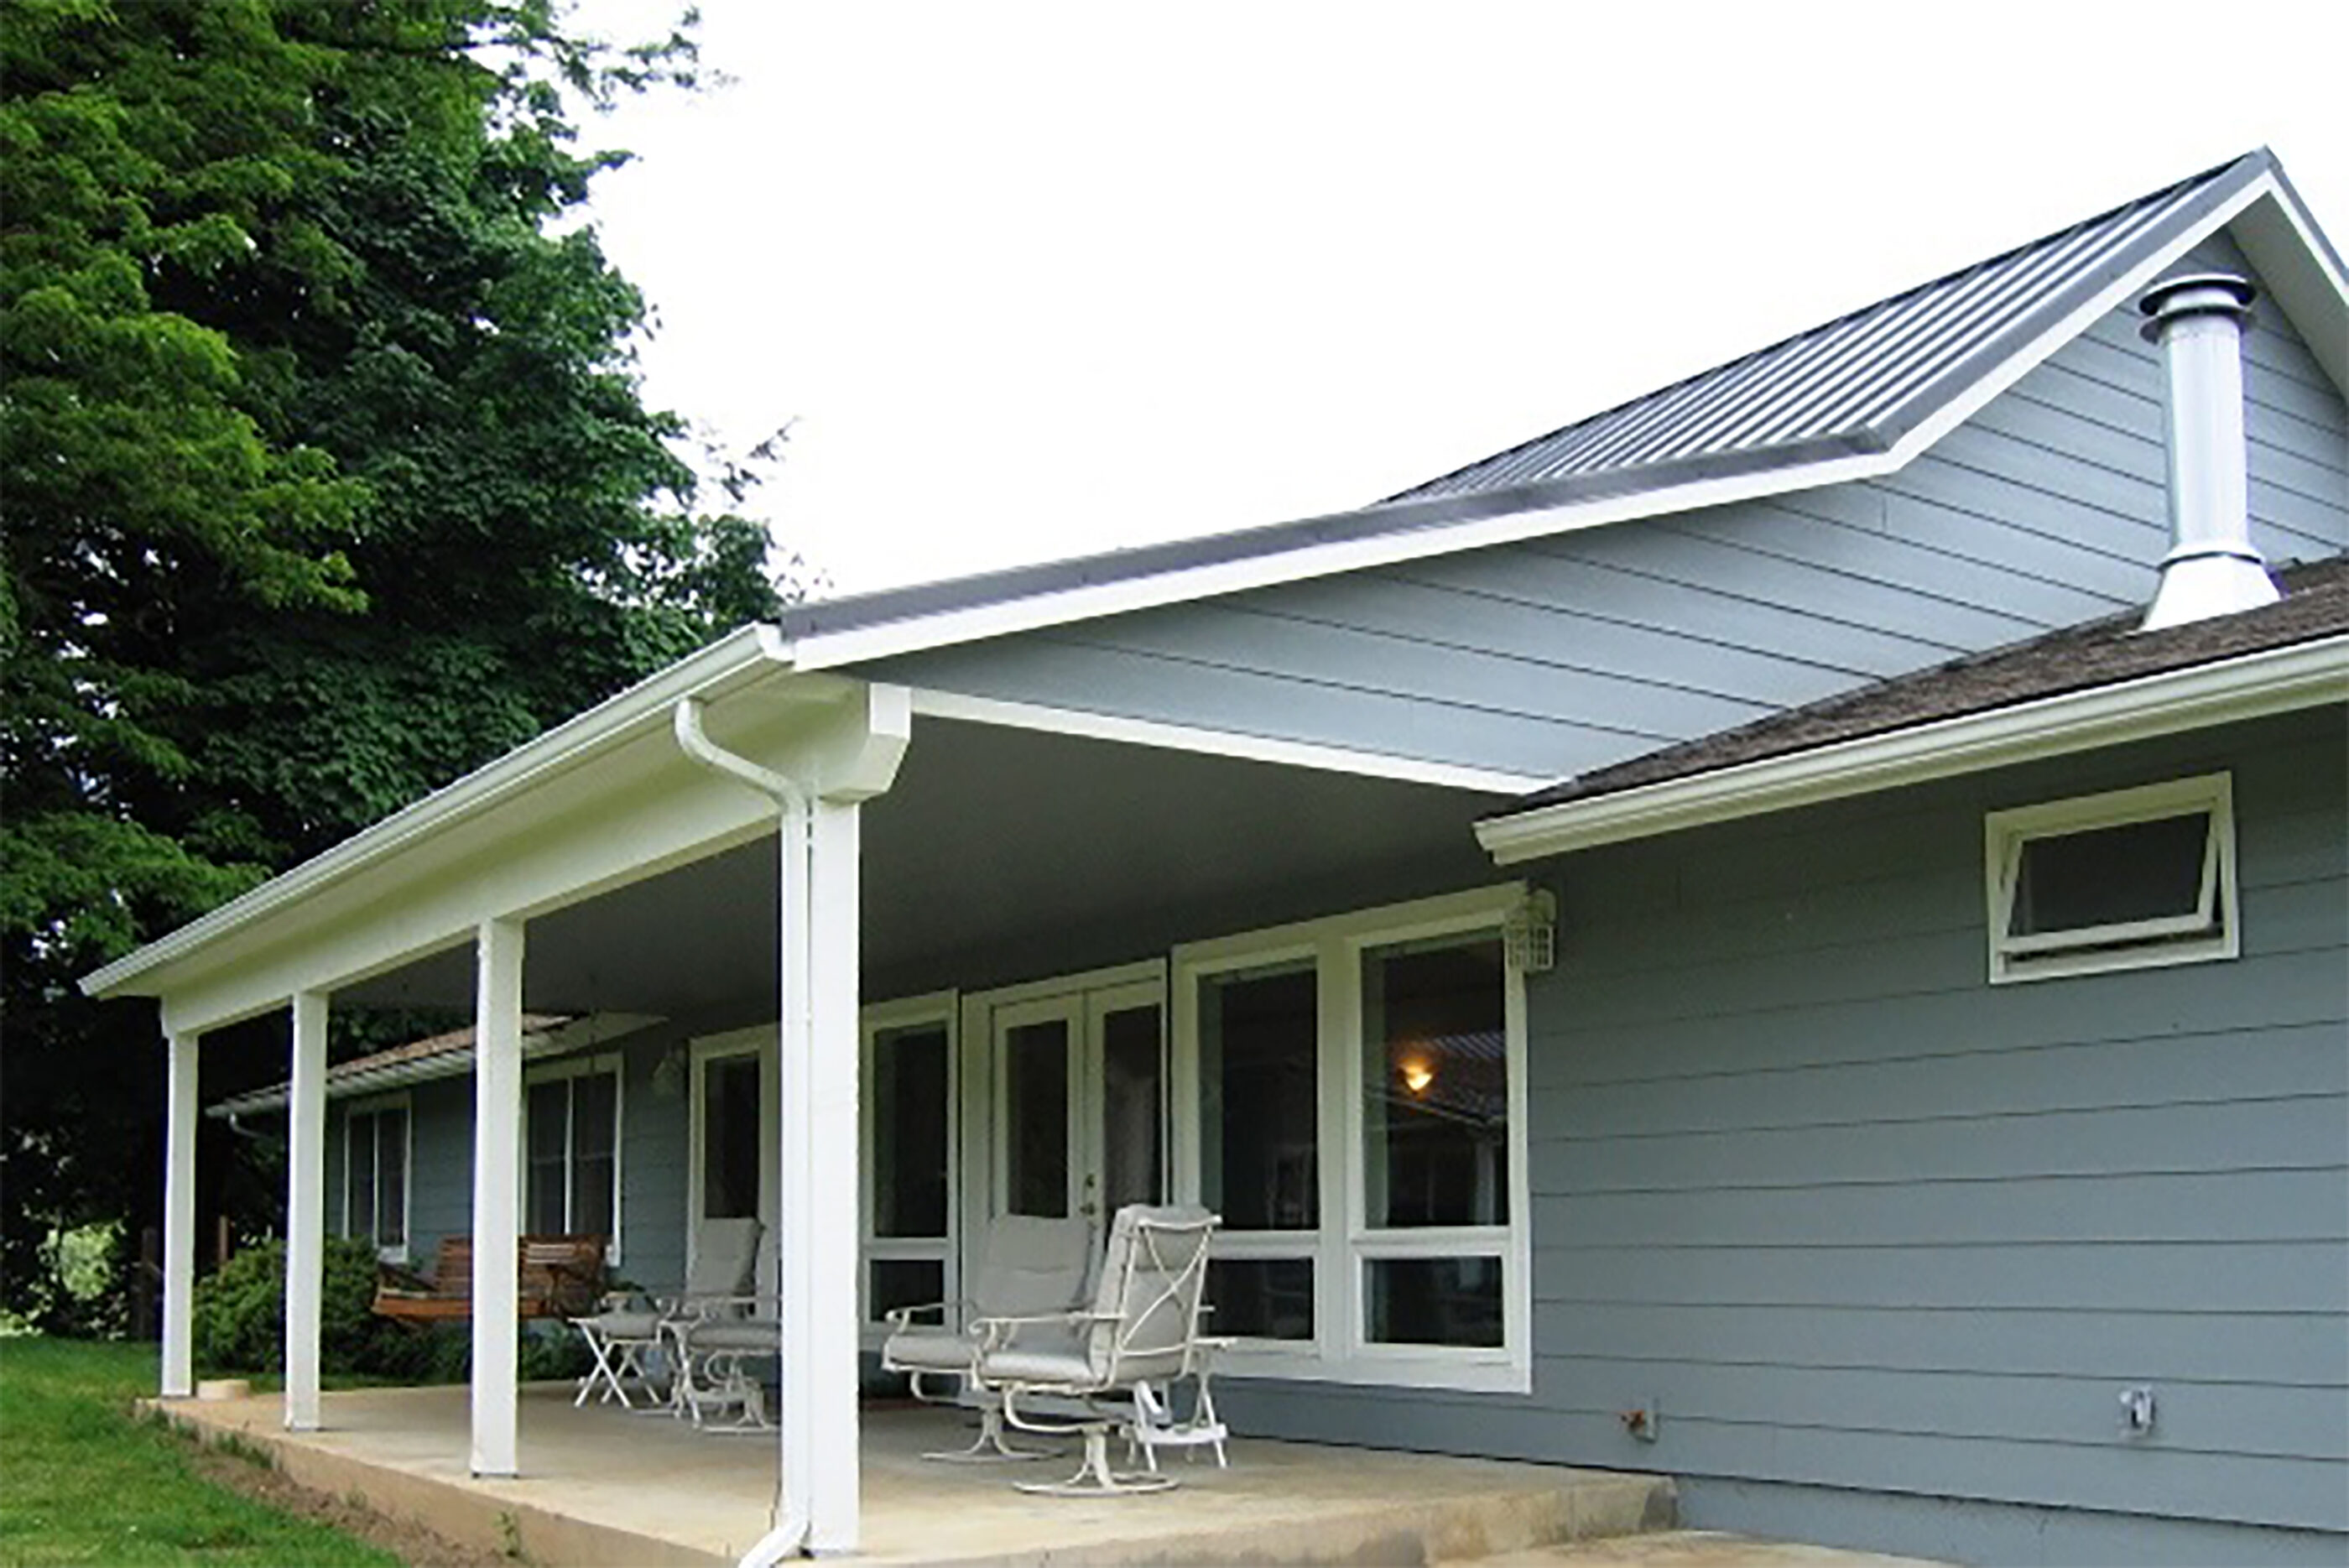 A new porch cover was built over a patio.